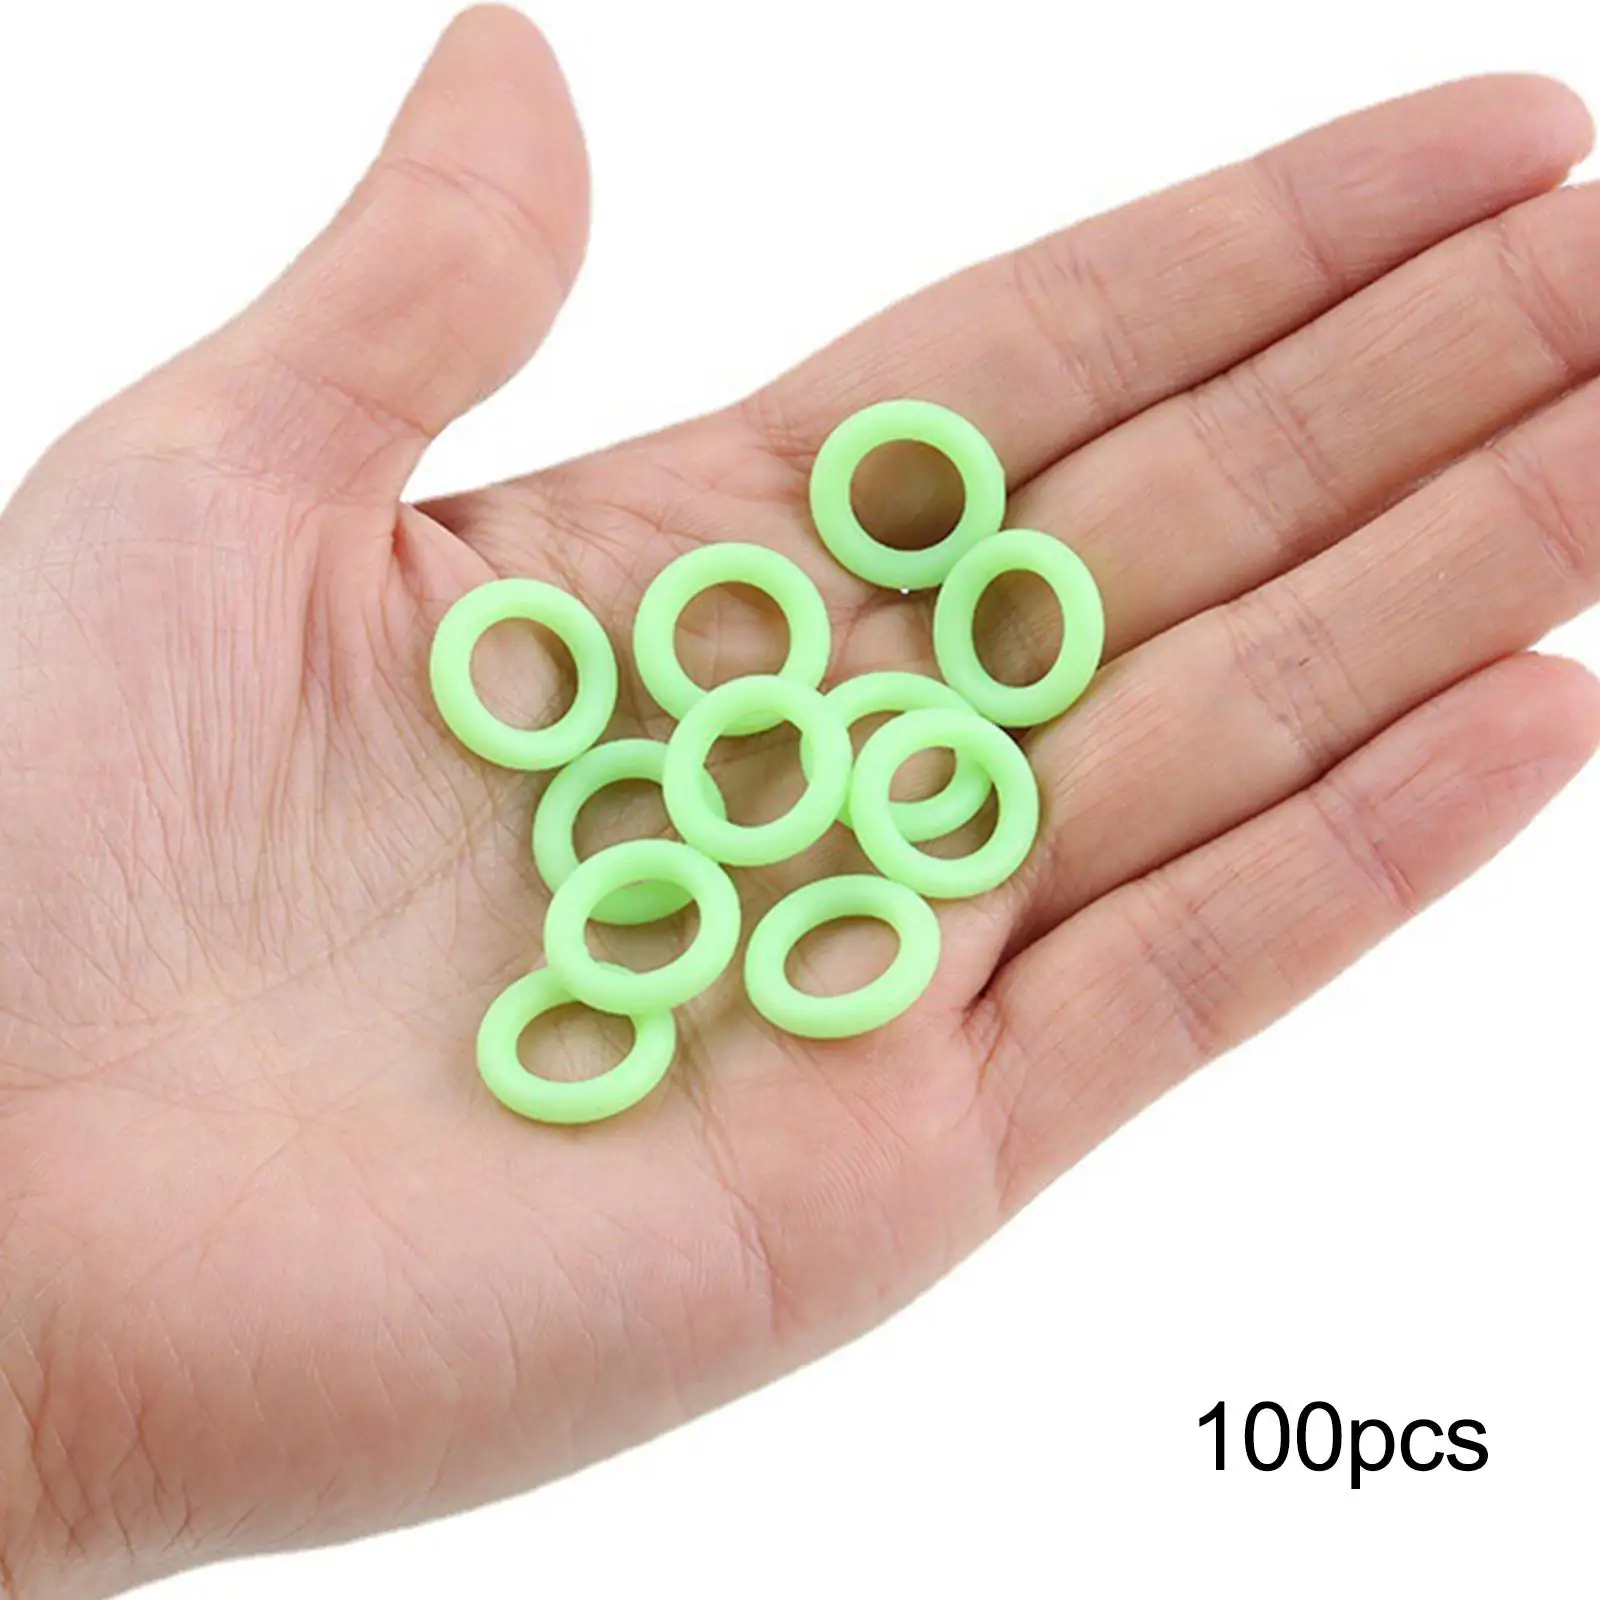 100x Tent Stake Rings, Silicone O Rings, O Shaped Rings Luminous Fluorescent